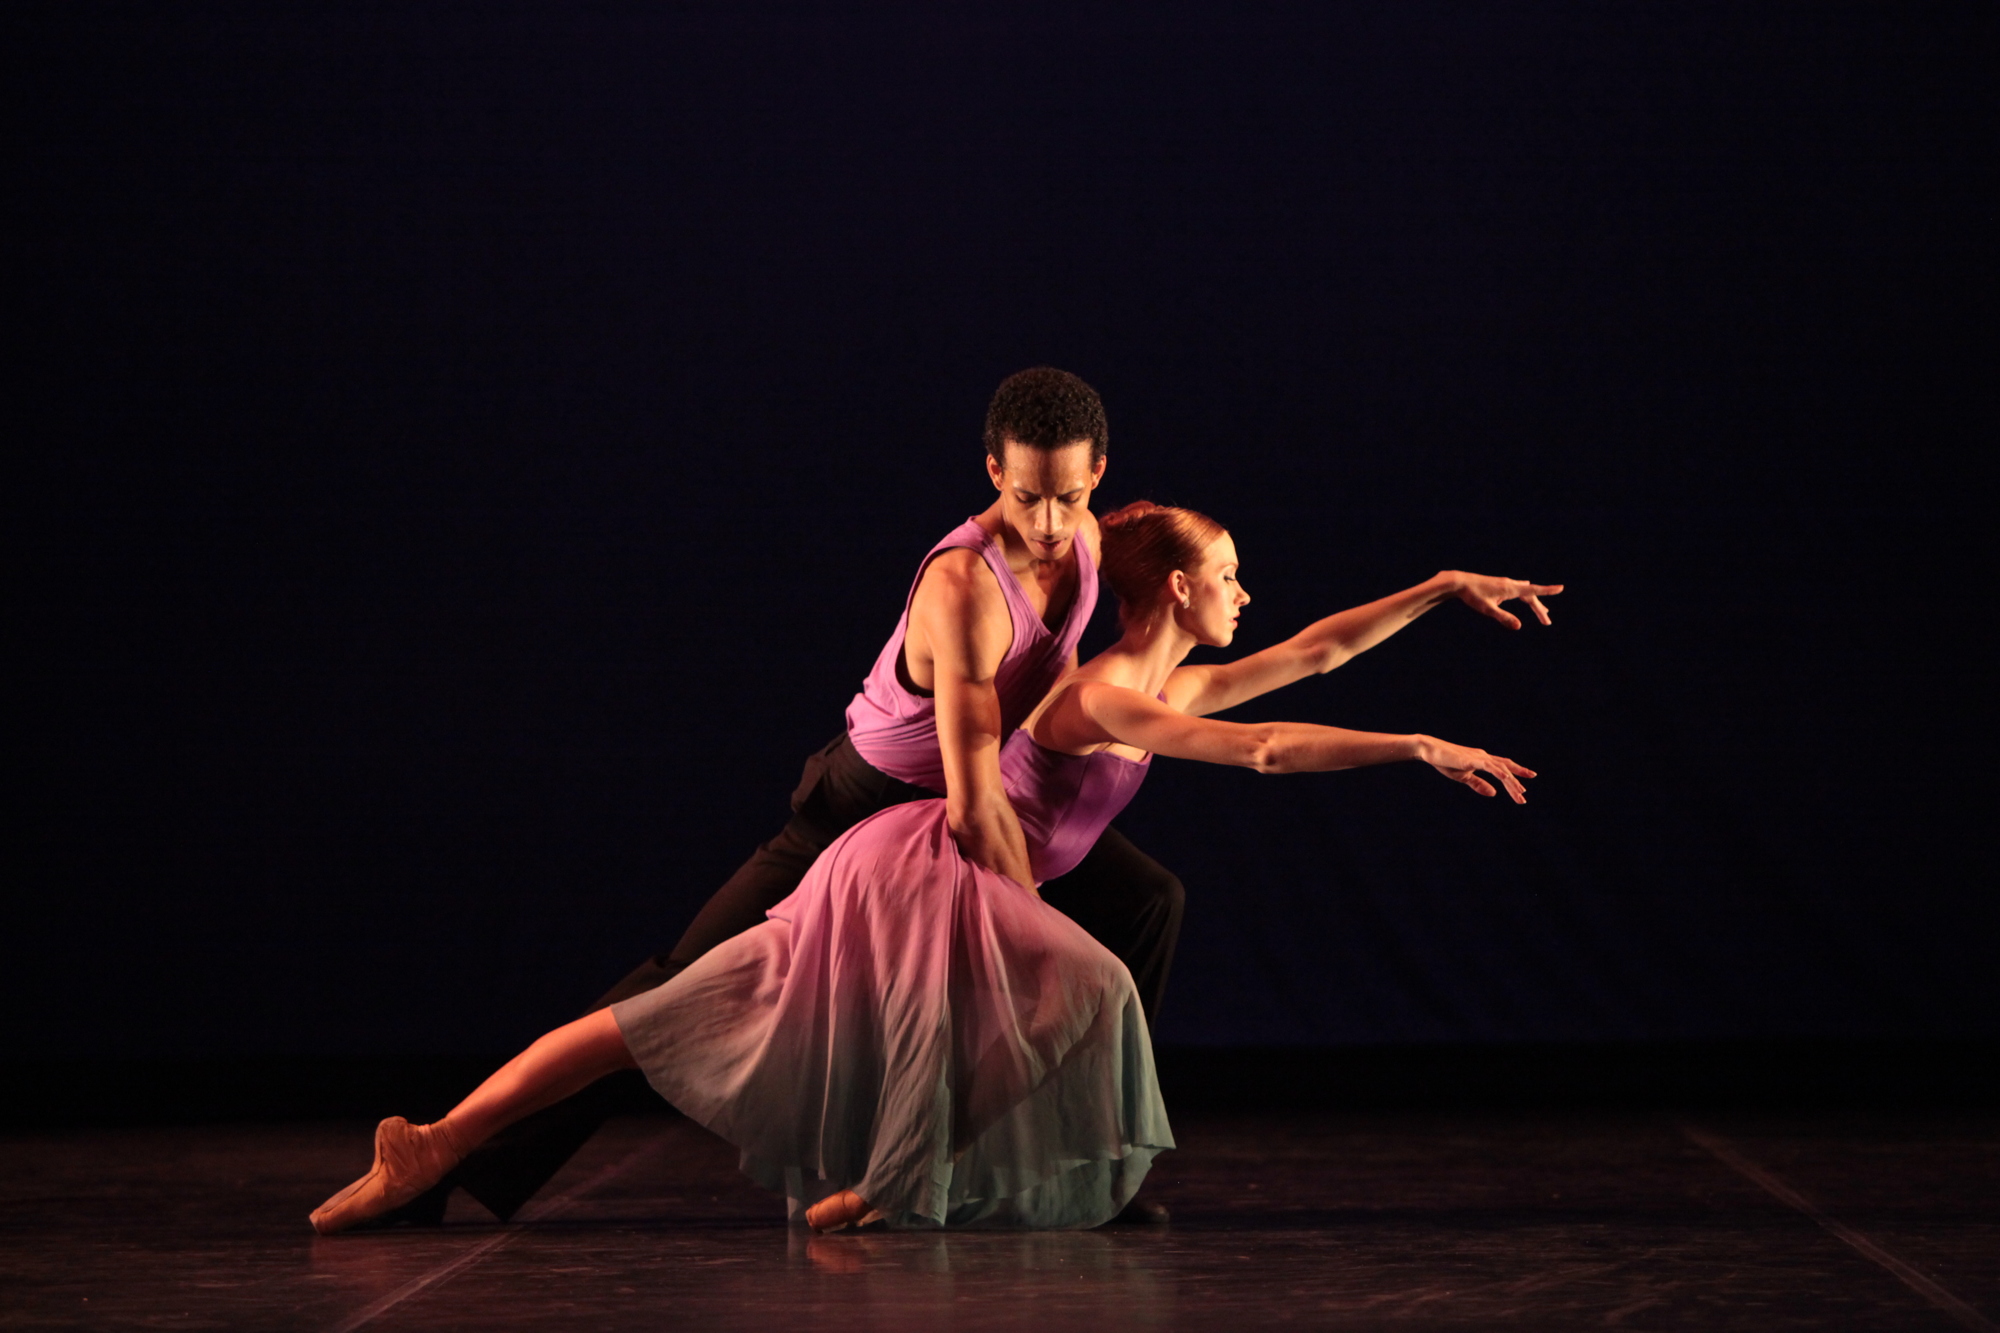 Ricardo Rhodes and Danielle Brown dance Christopher Wheeldon’s “There Where She Loved.